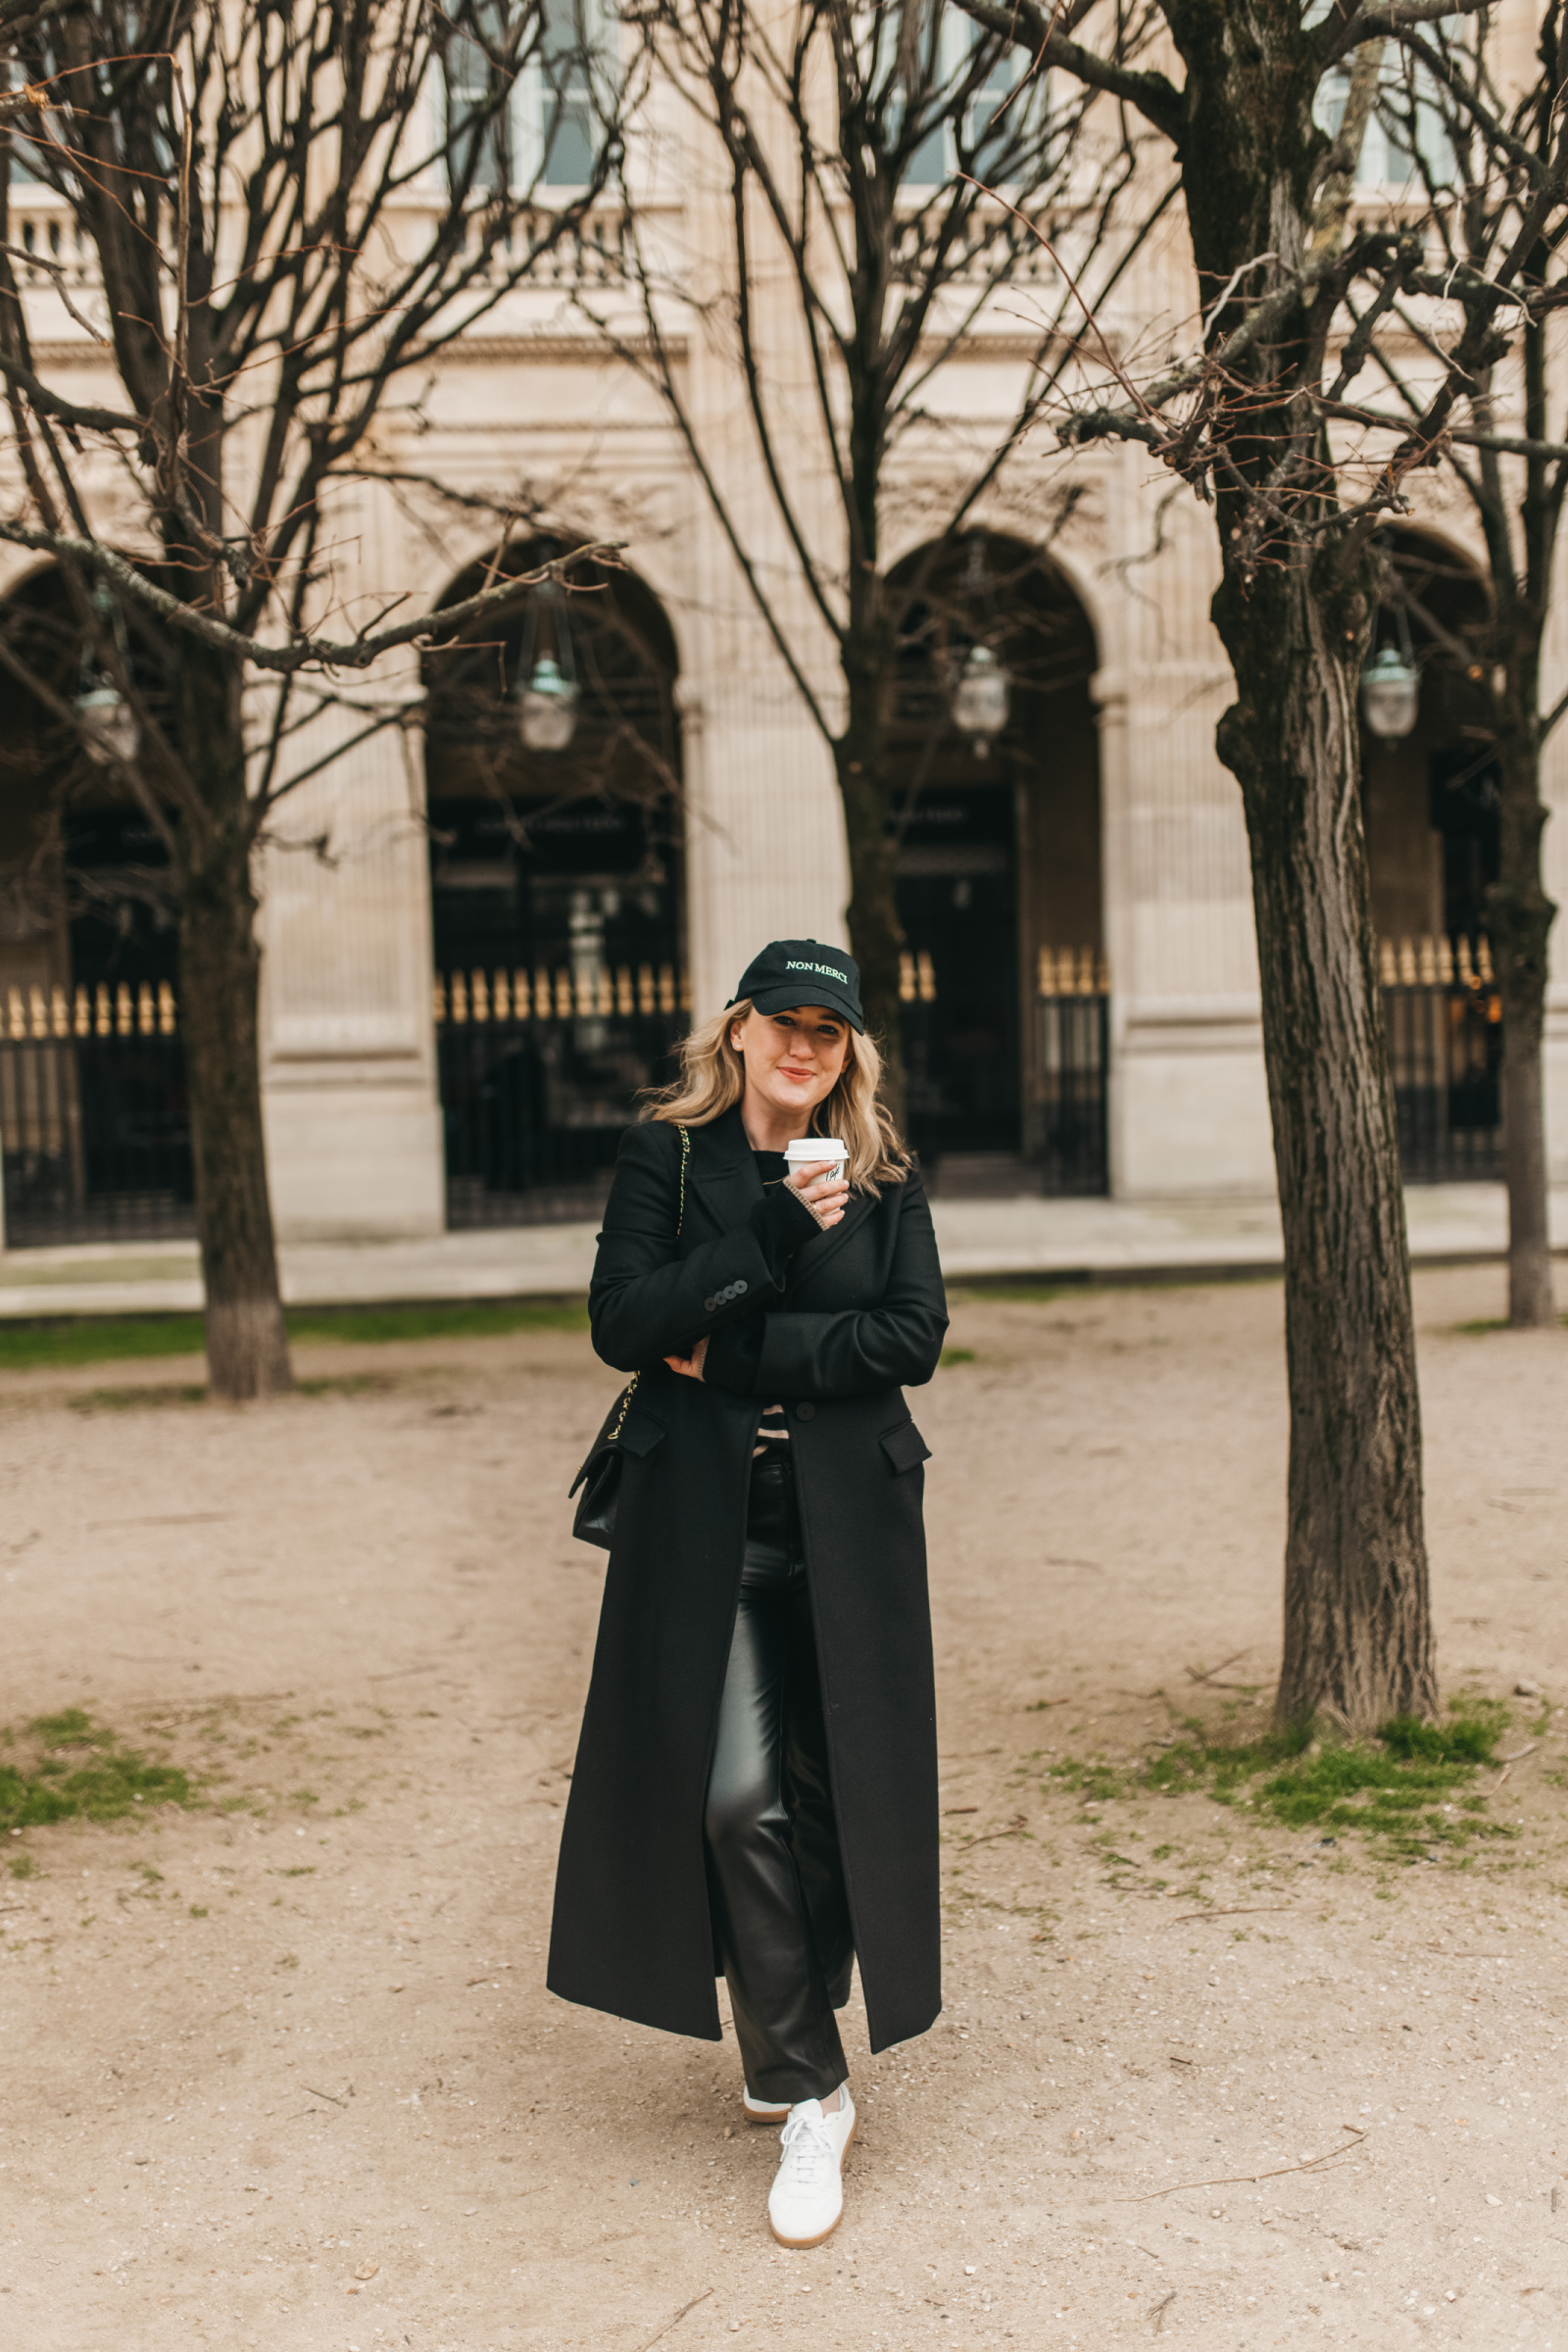 8 Outfit Ideas That Will Inspire You To Wear Black Tights Everyday